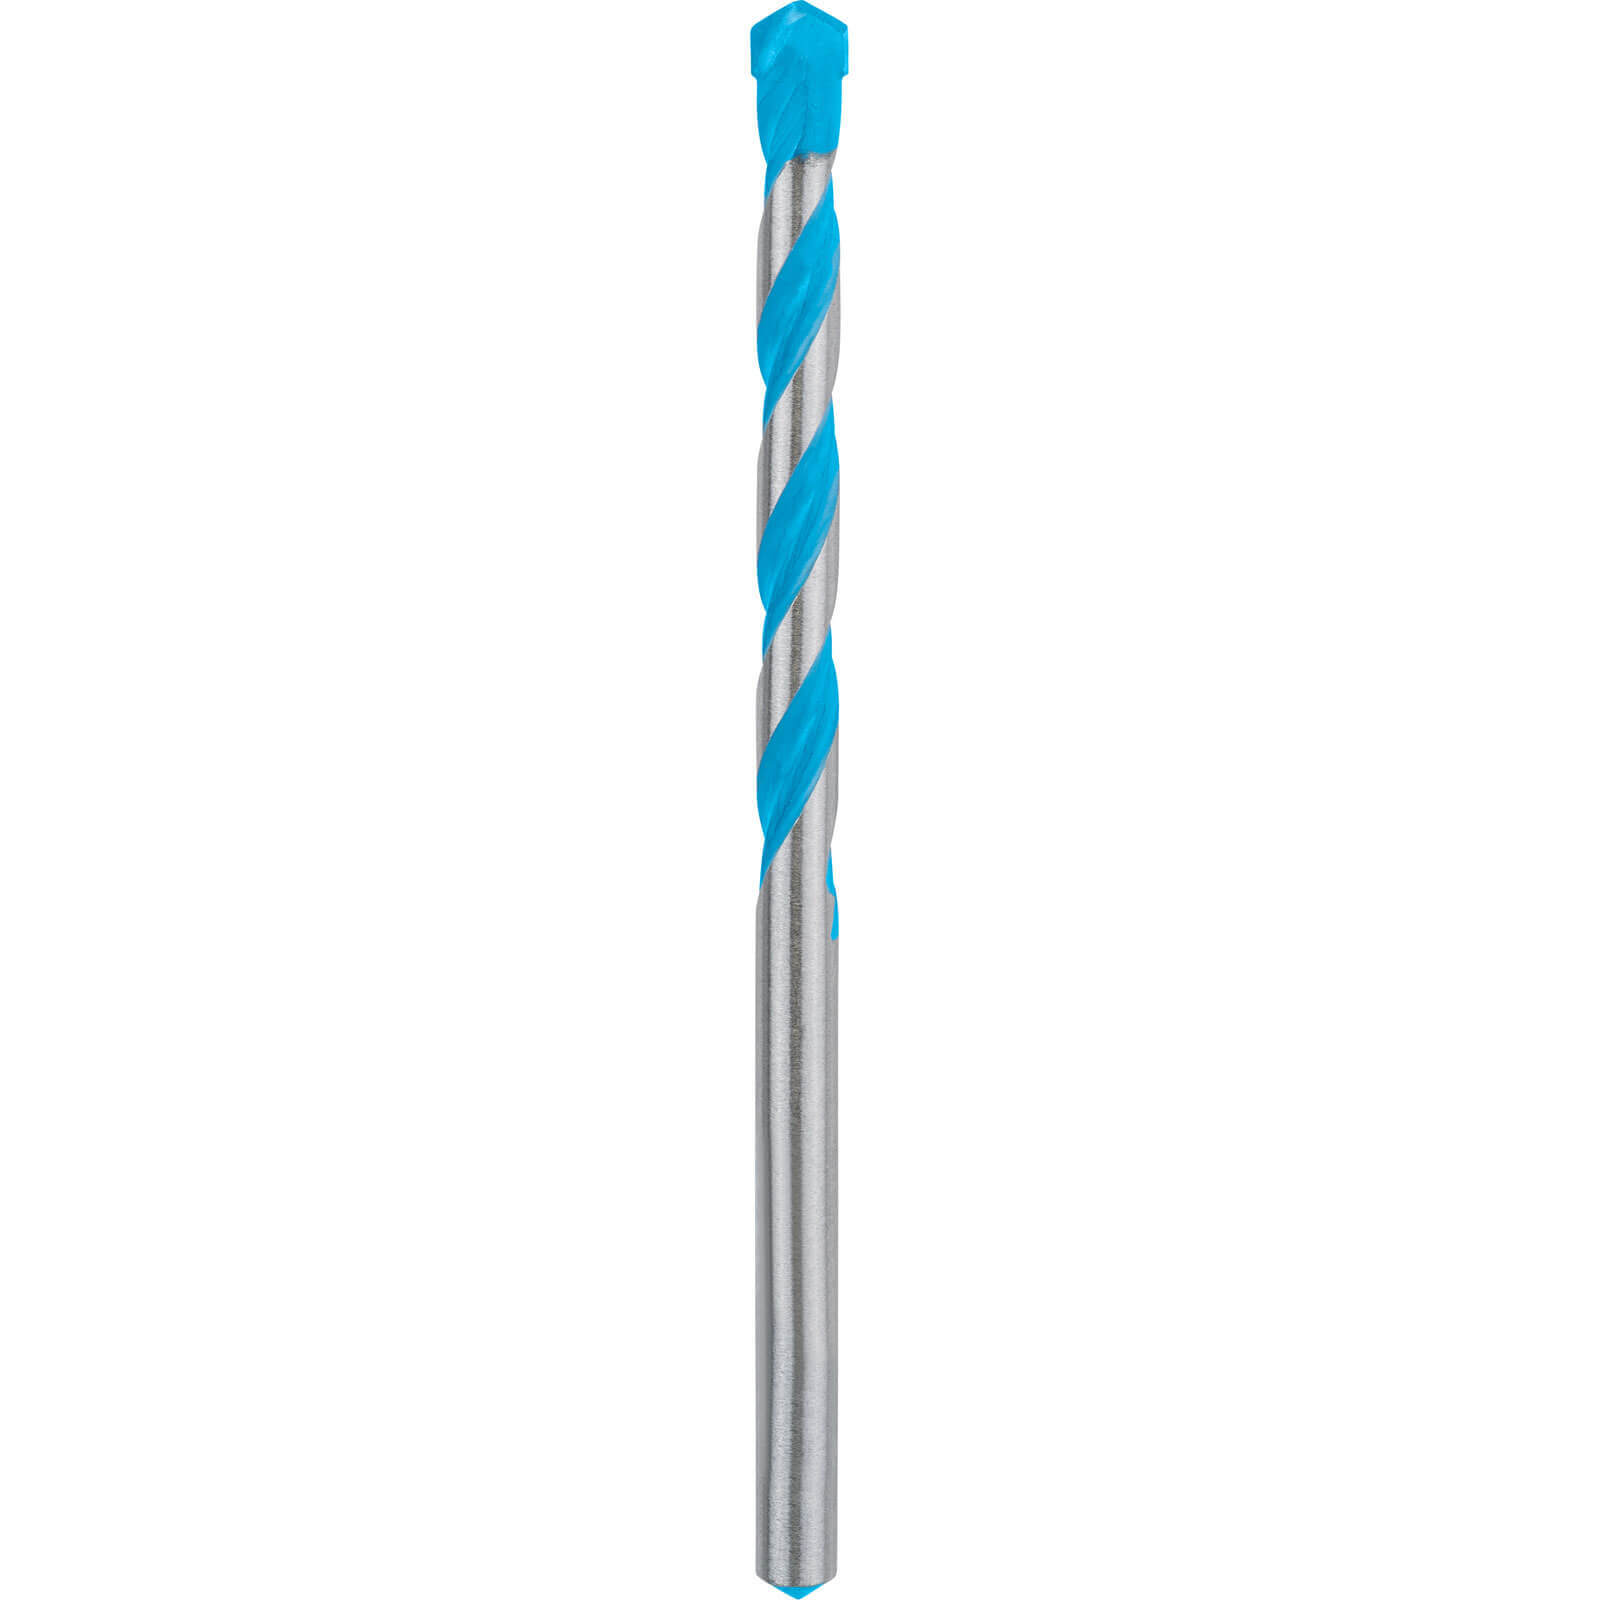 Image of Bosch Expert CYL-9 Multi Construction Drill Bit 5.5mm 85mm Pack of 1